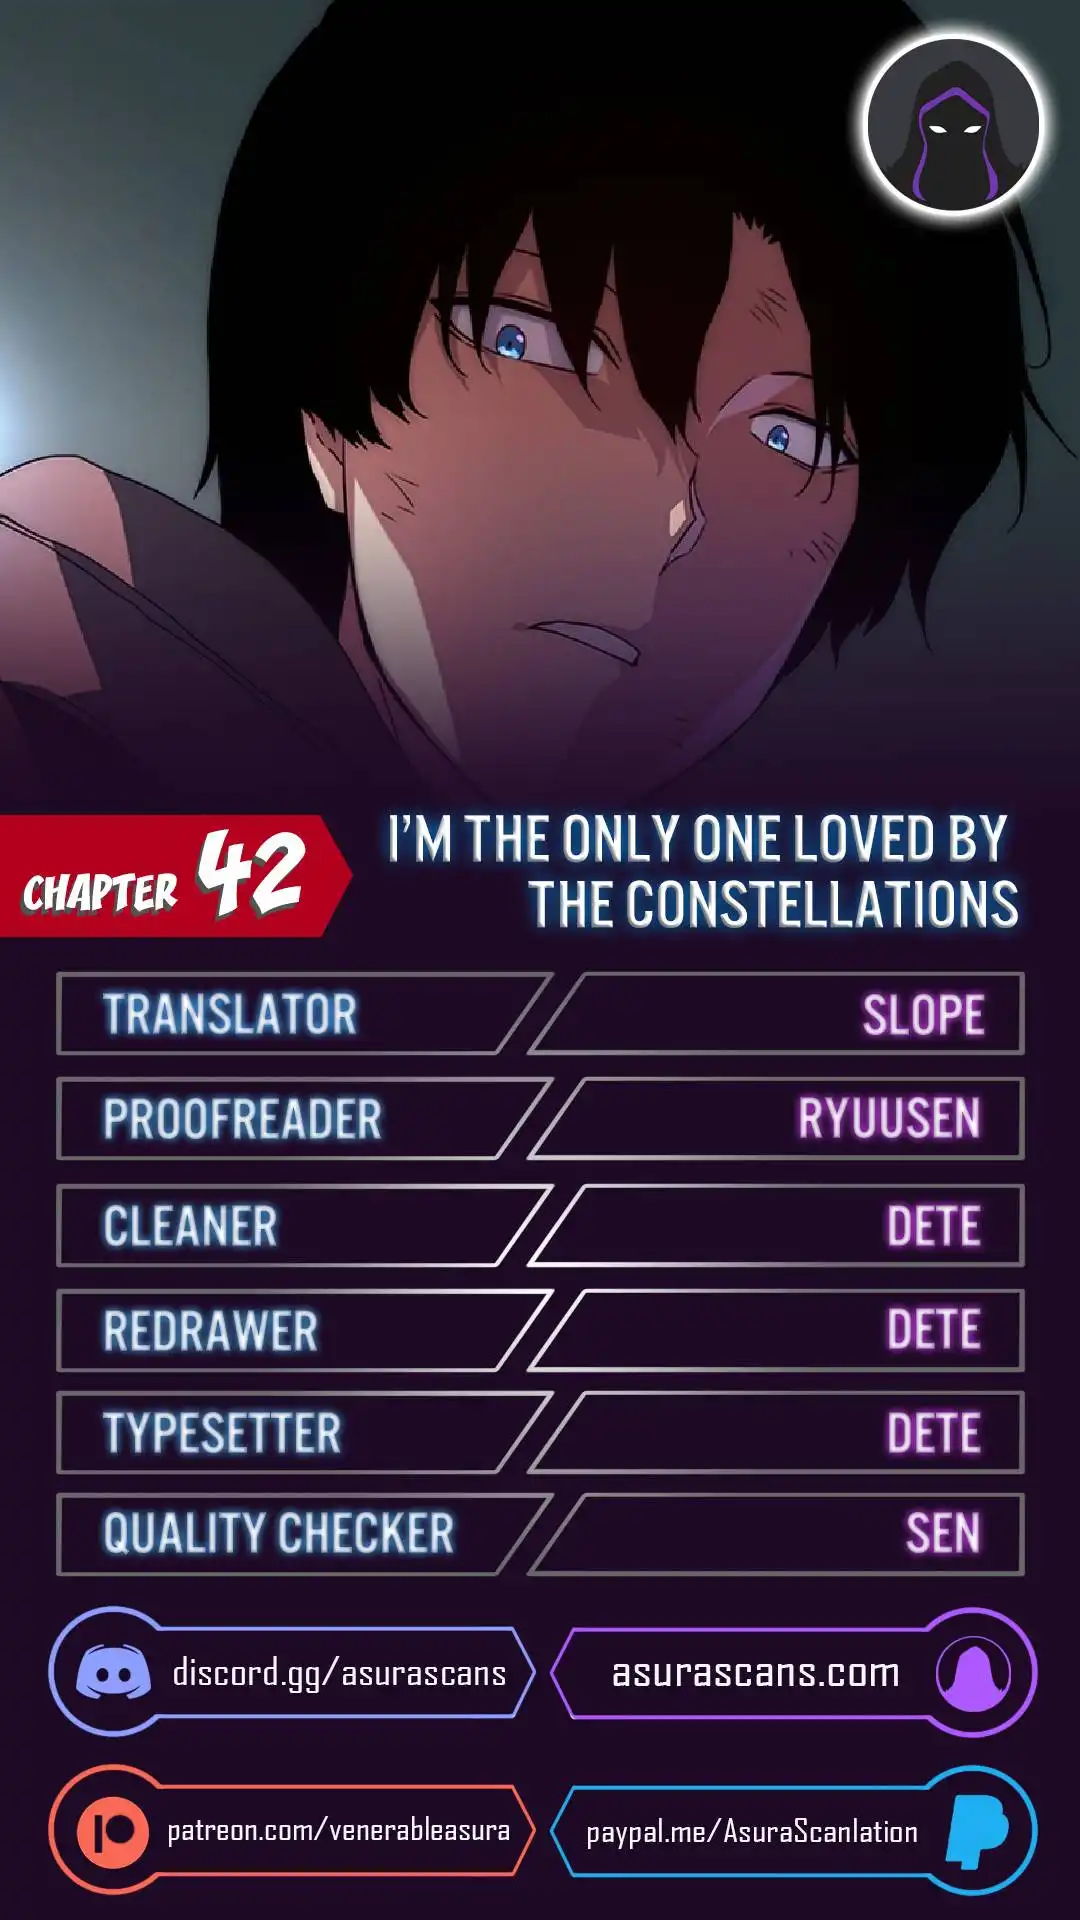 I'm the Only One Loved by the Constellations! Chapter 42